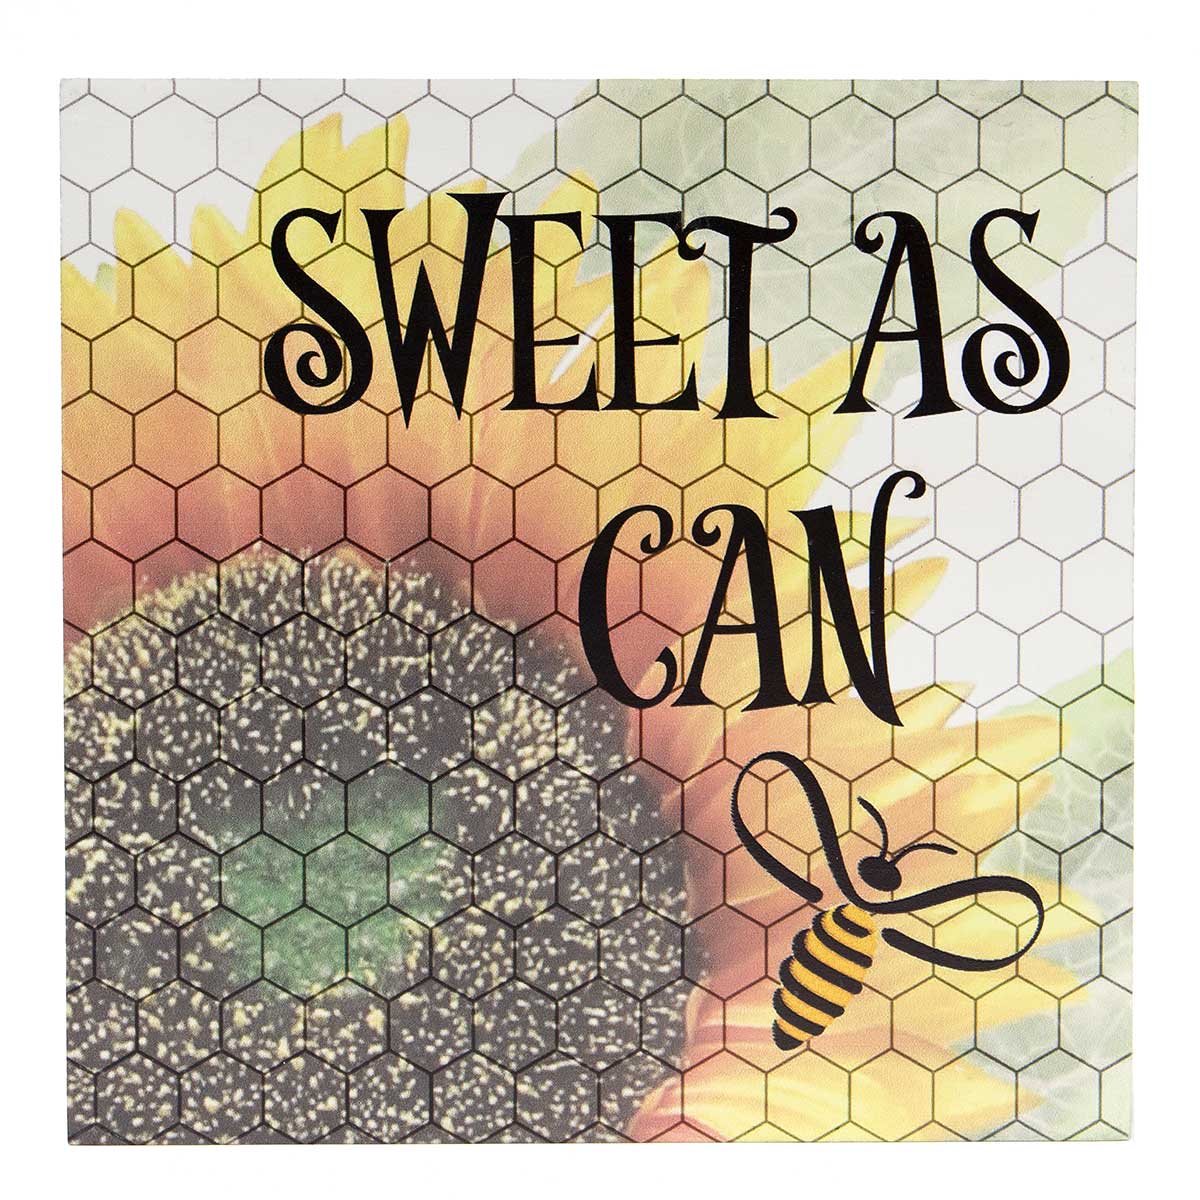 !Sweet As Can Bee Wood Hanging/Standing Sign